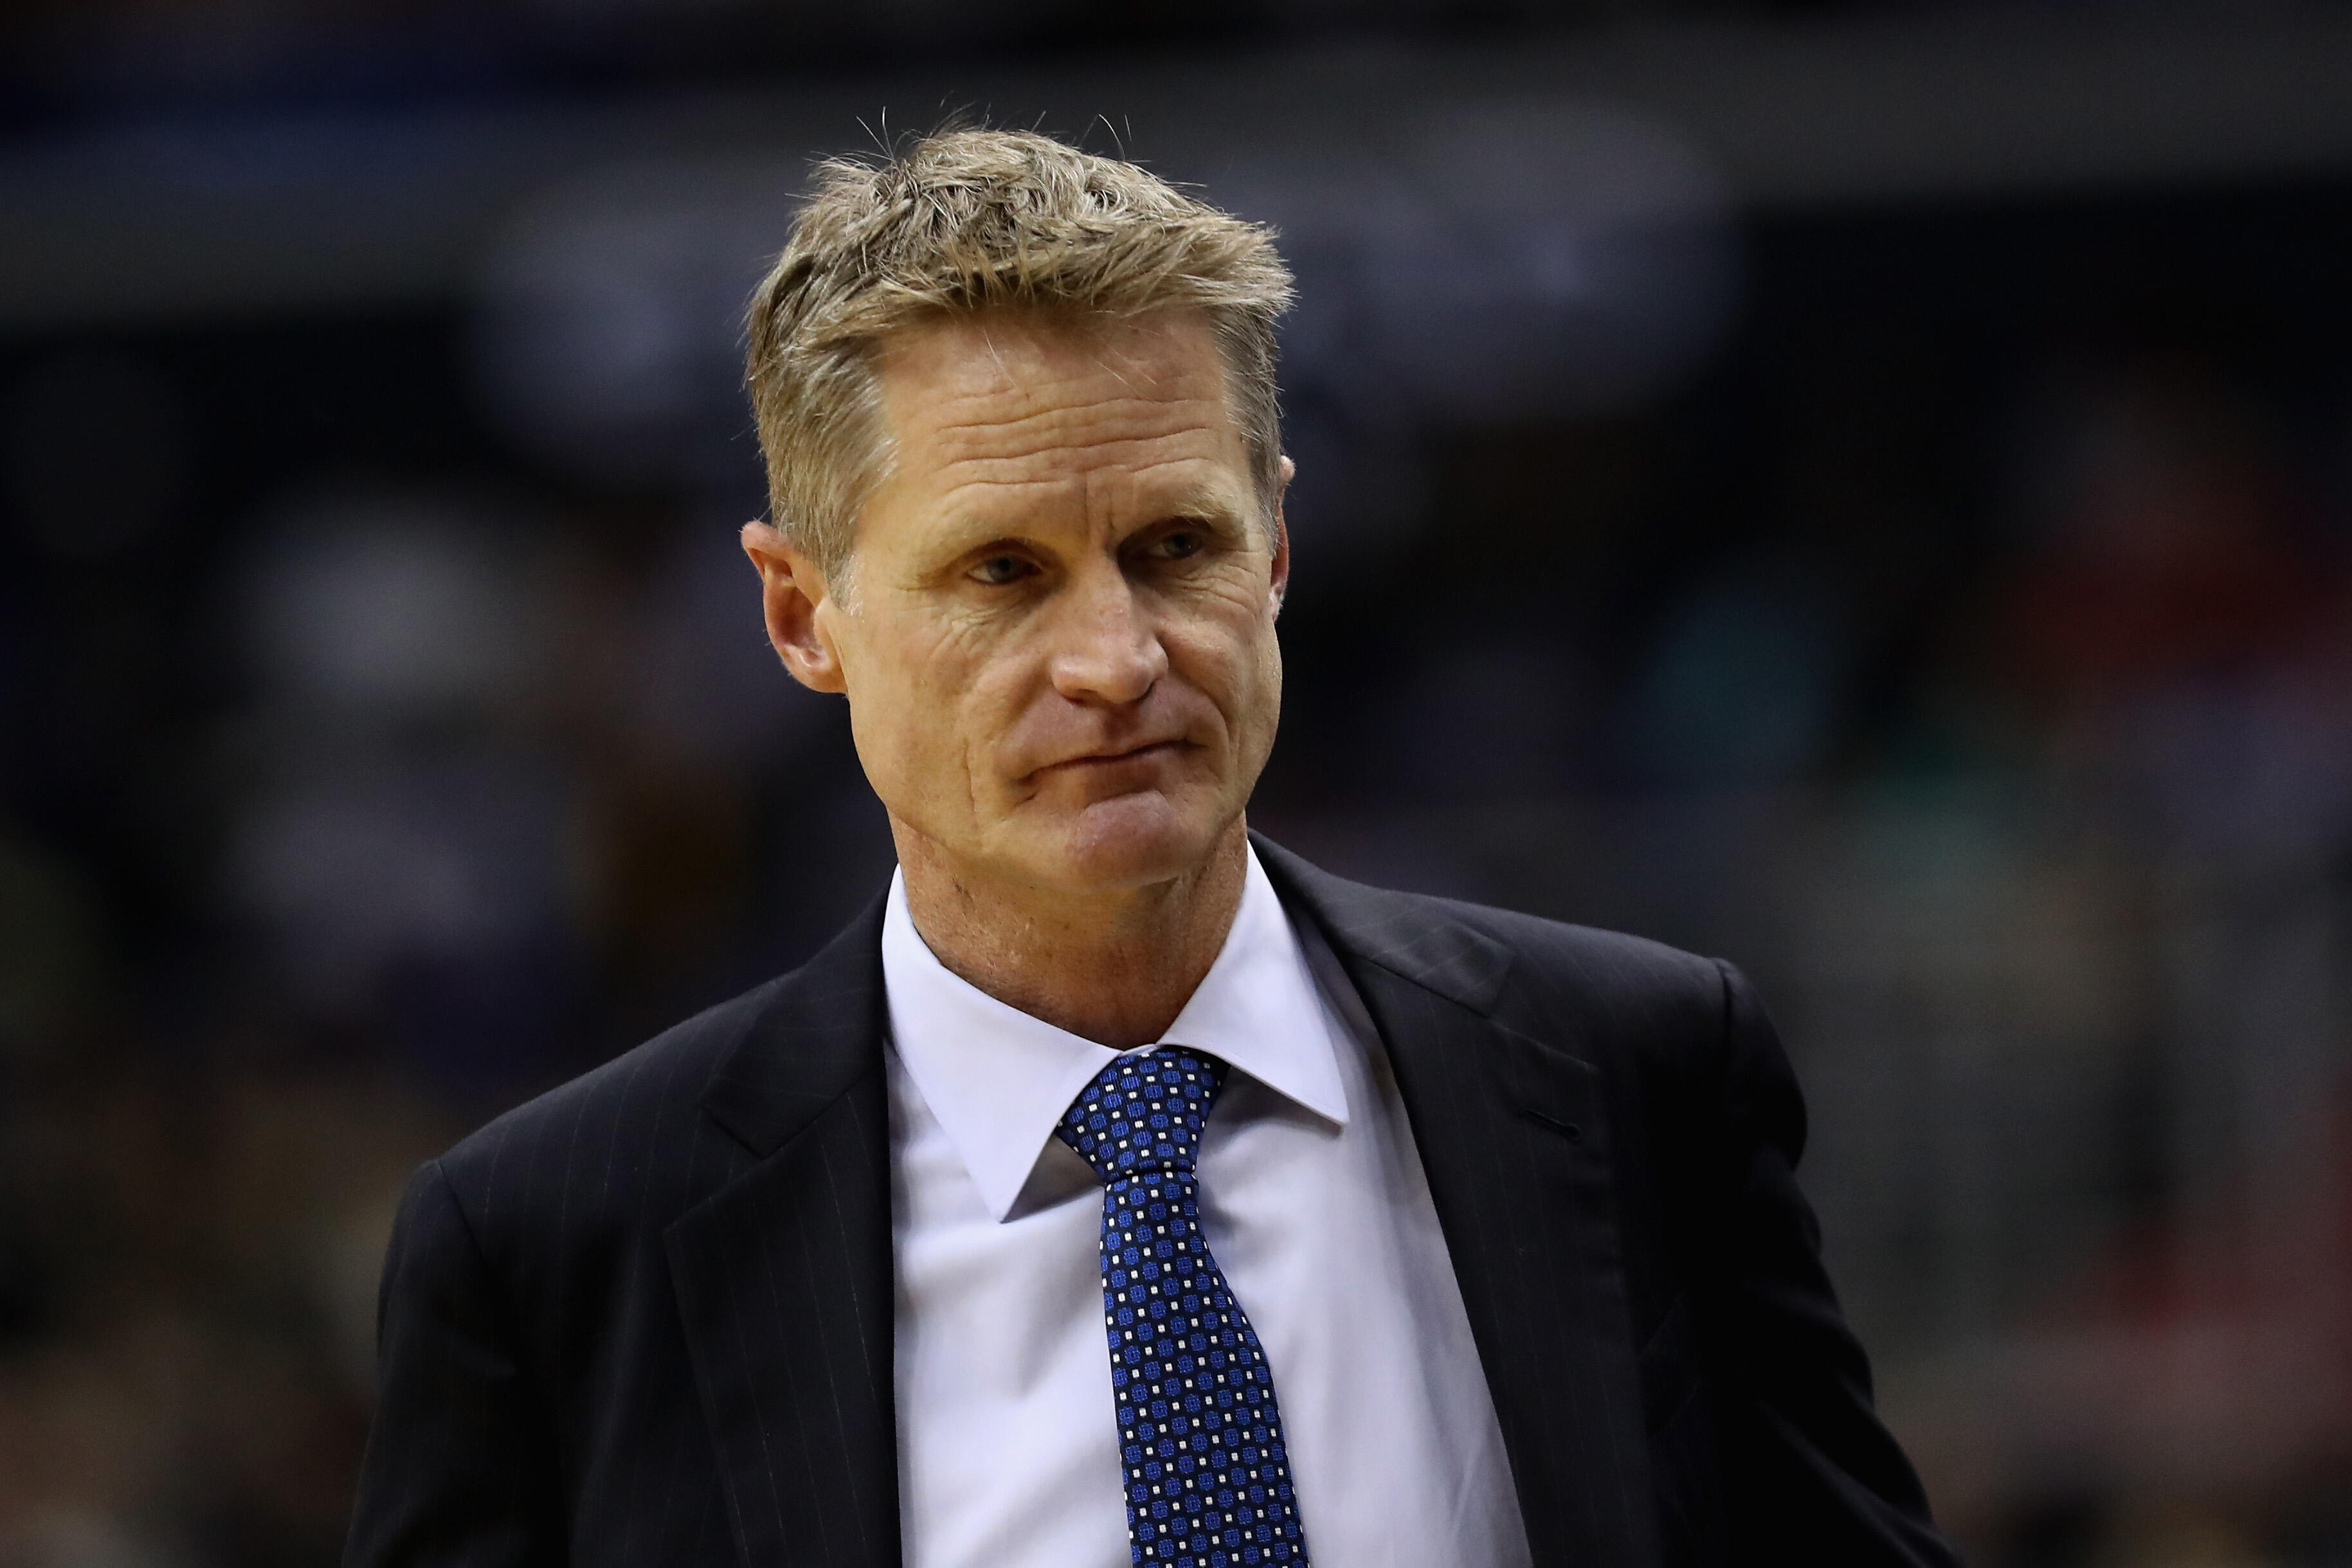 WASHINGTON, DC - FEBRUARY 28: Head coach Steve Kerr of the Golden State Warriors looks on in the first half against the Washington Wizards at Verizon Center on February 28, 2017 in Washington, DC. NOTE TO USER: User expressly acknowledges and agrees that,